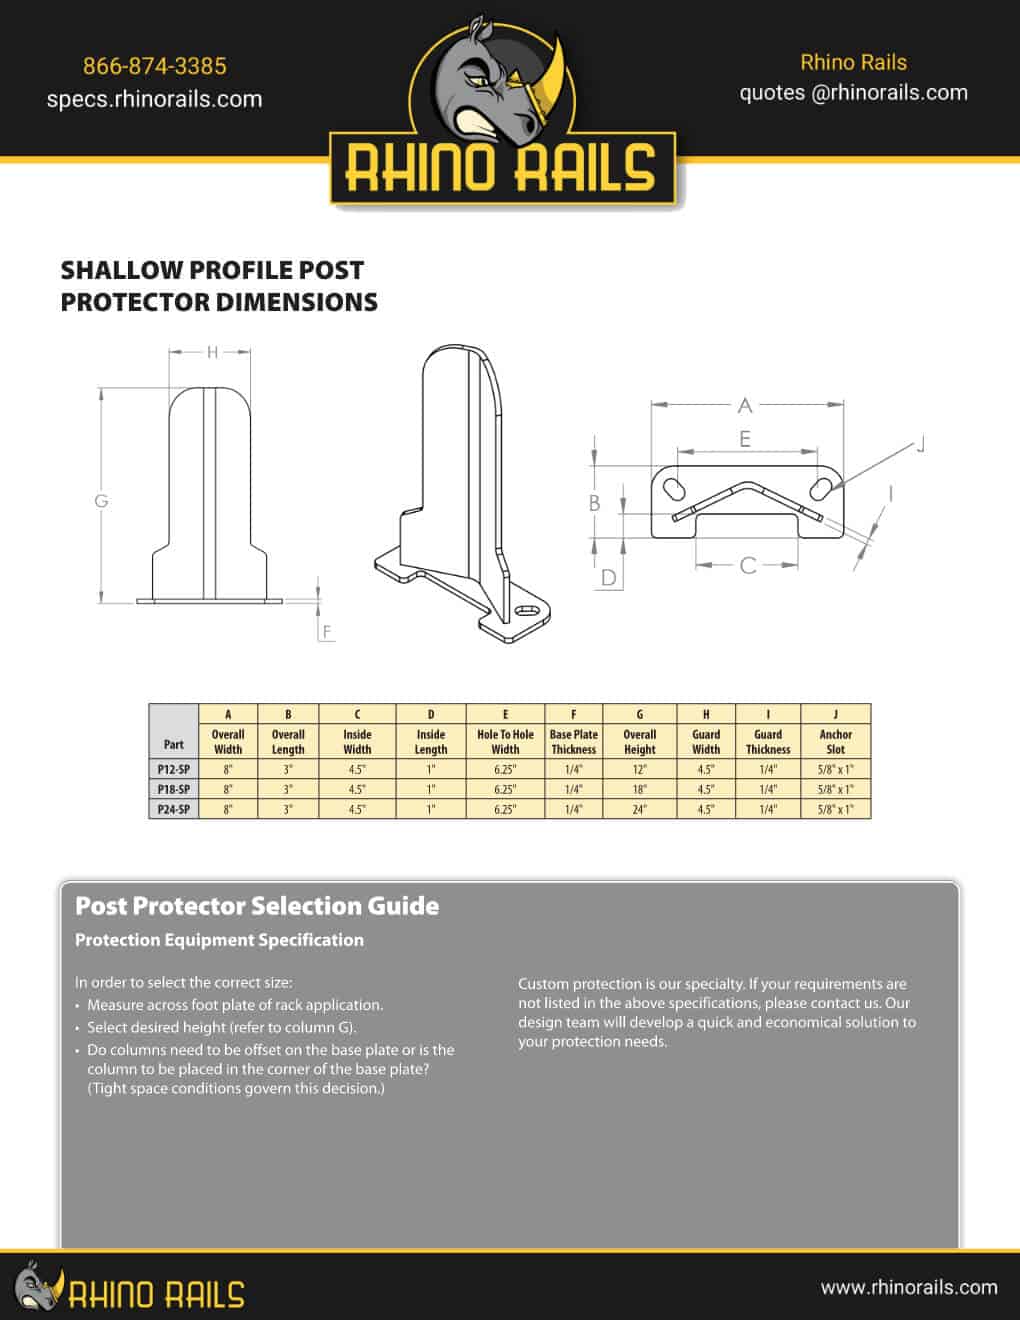 Shallow Profile Post Protector - Product Information Sheet - Photo 2